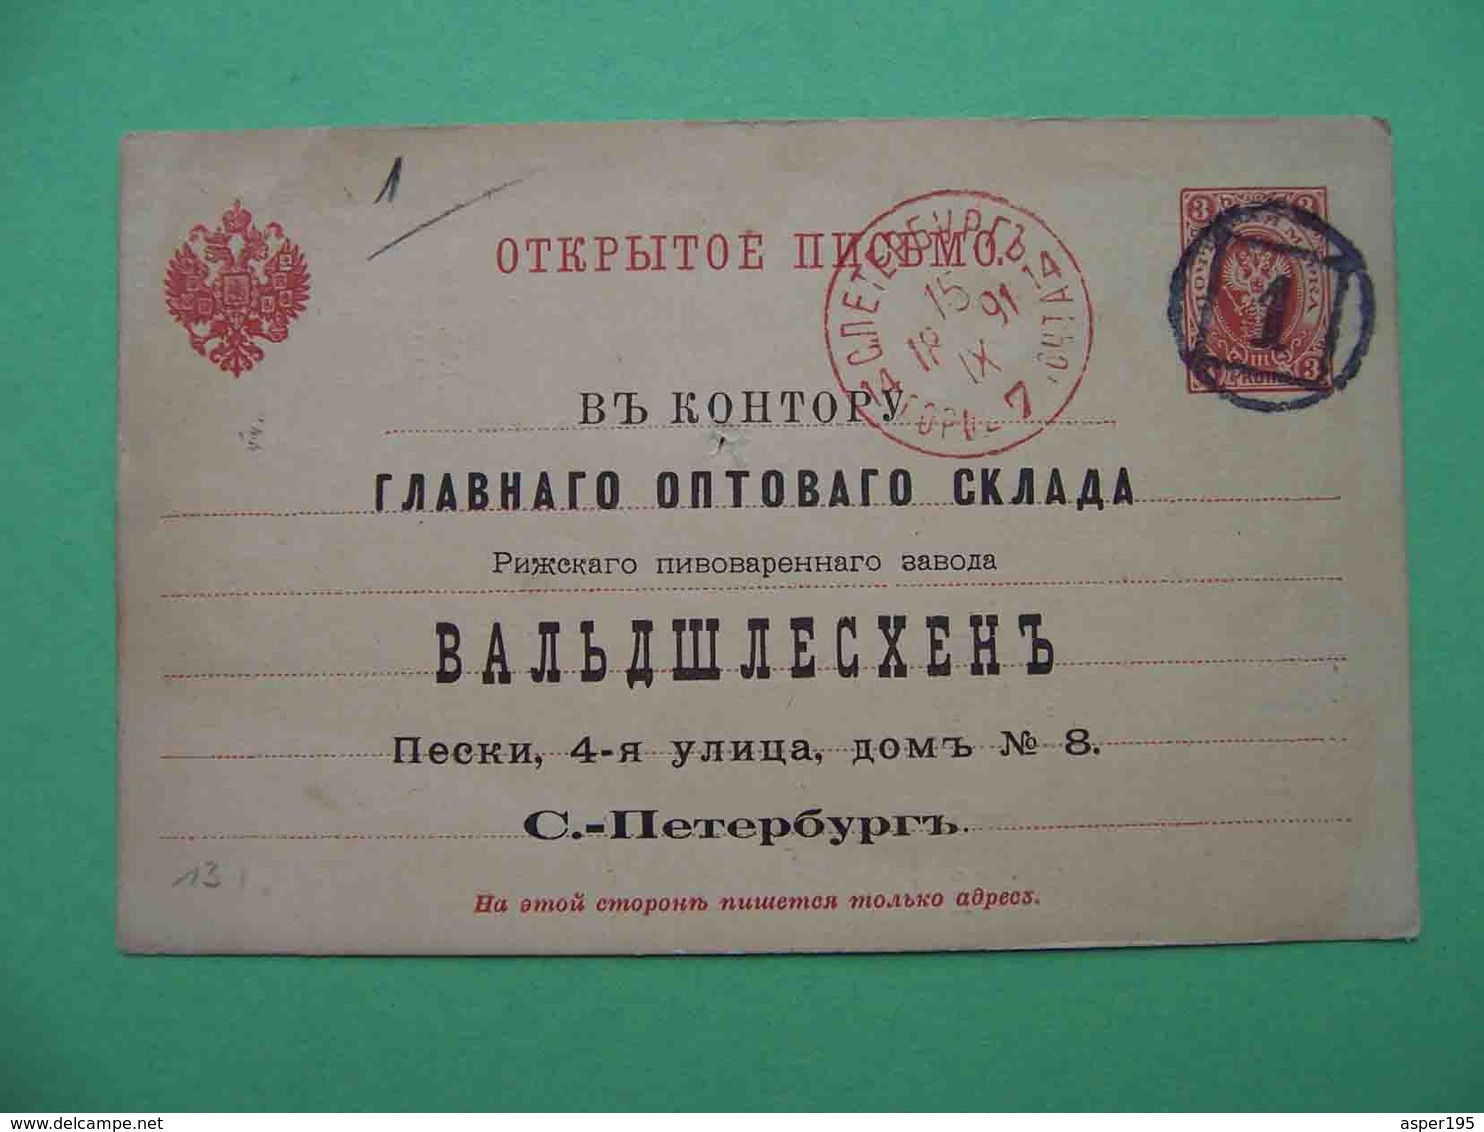 St. Petersburg 1891 BEER, Riga Brewery. Russian Card Order For The Bavarian Beer. City Mail SPB, Office #1 - Briefe U. Dokumente